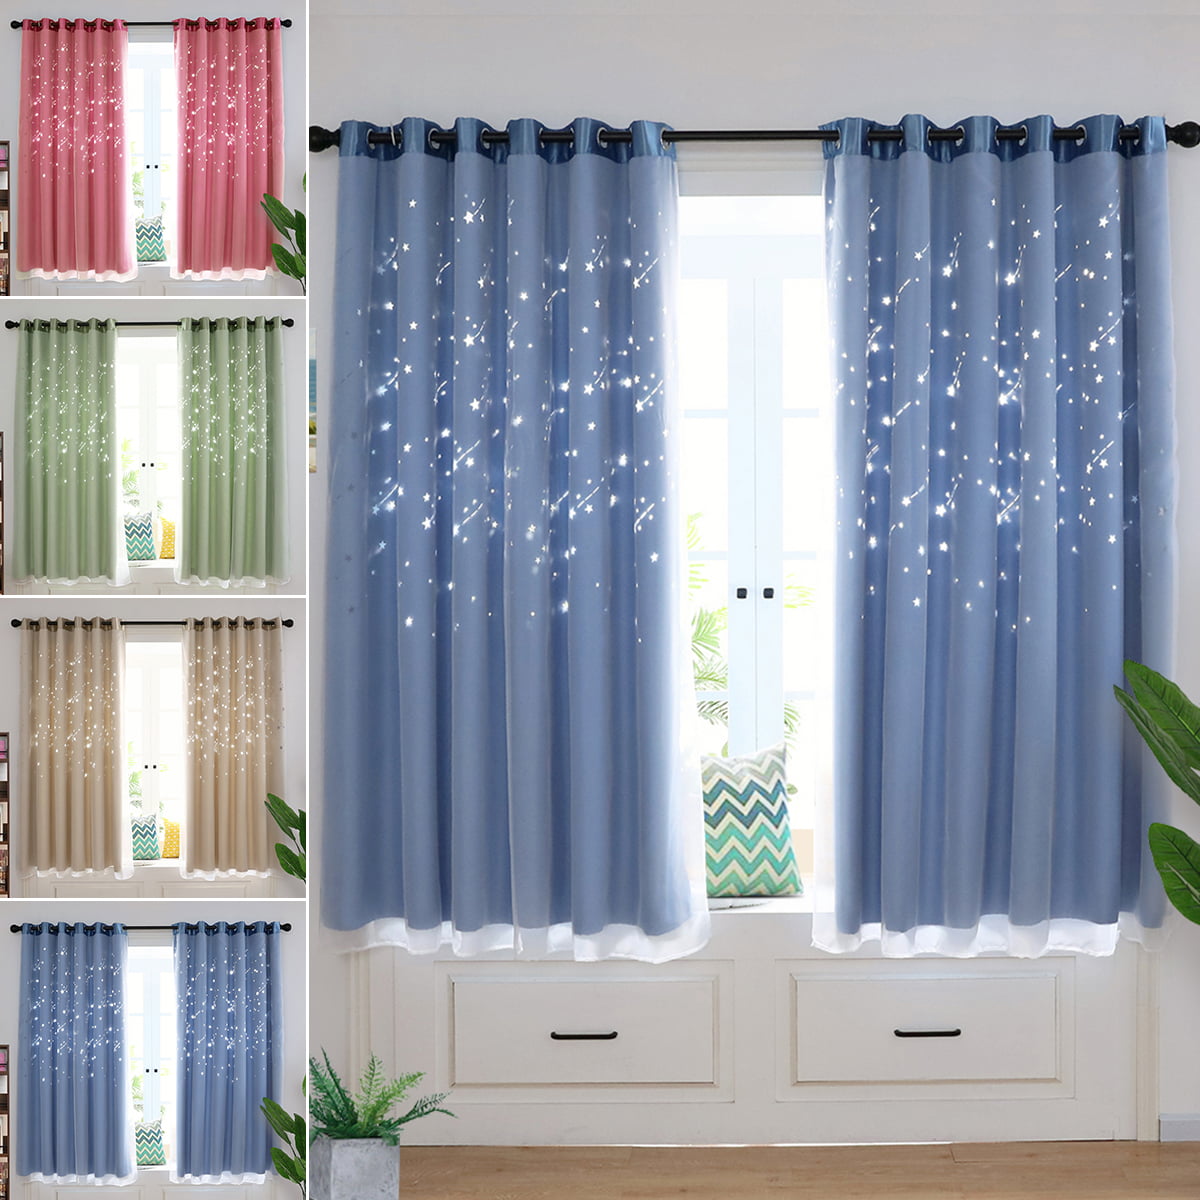 Luxury Pair Childrens Kids Boys Girls Bedroom Ring Top Thermal Blackout Curtains 